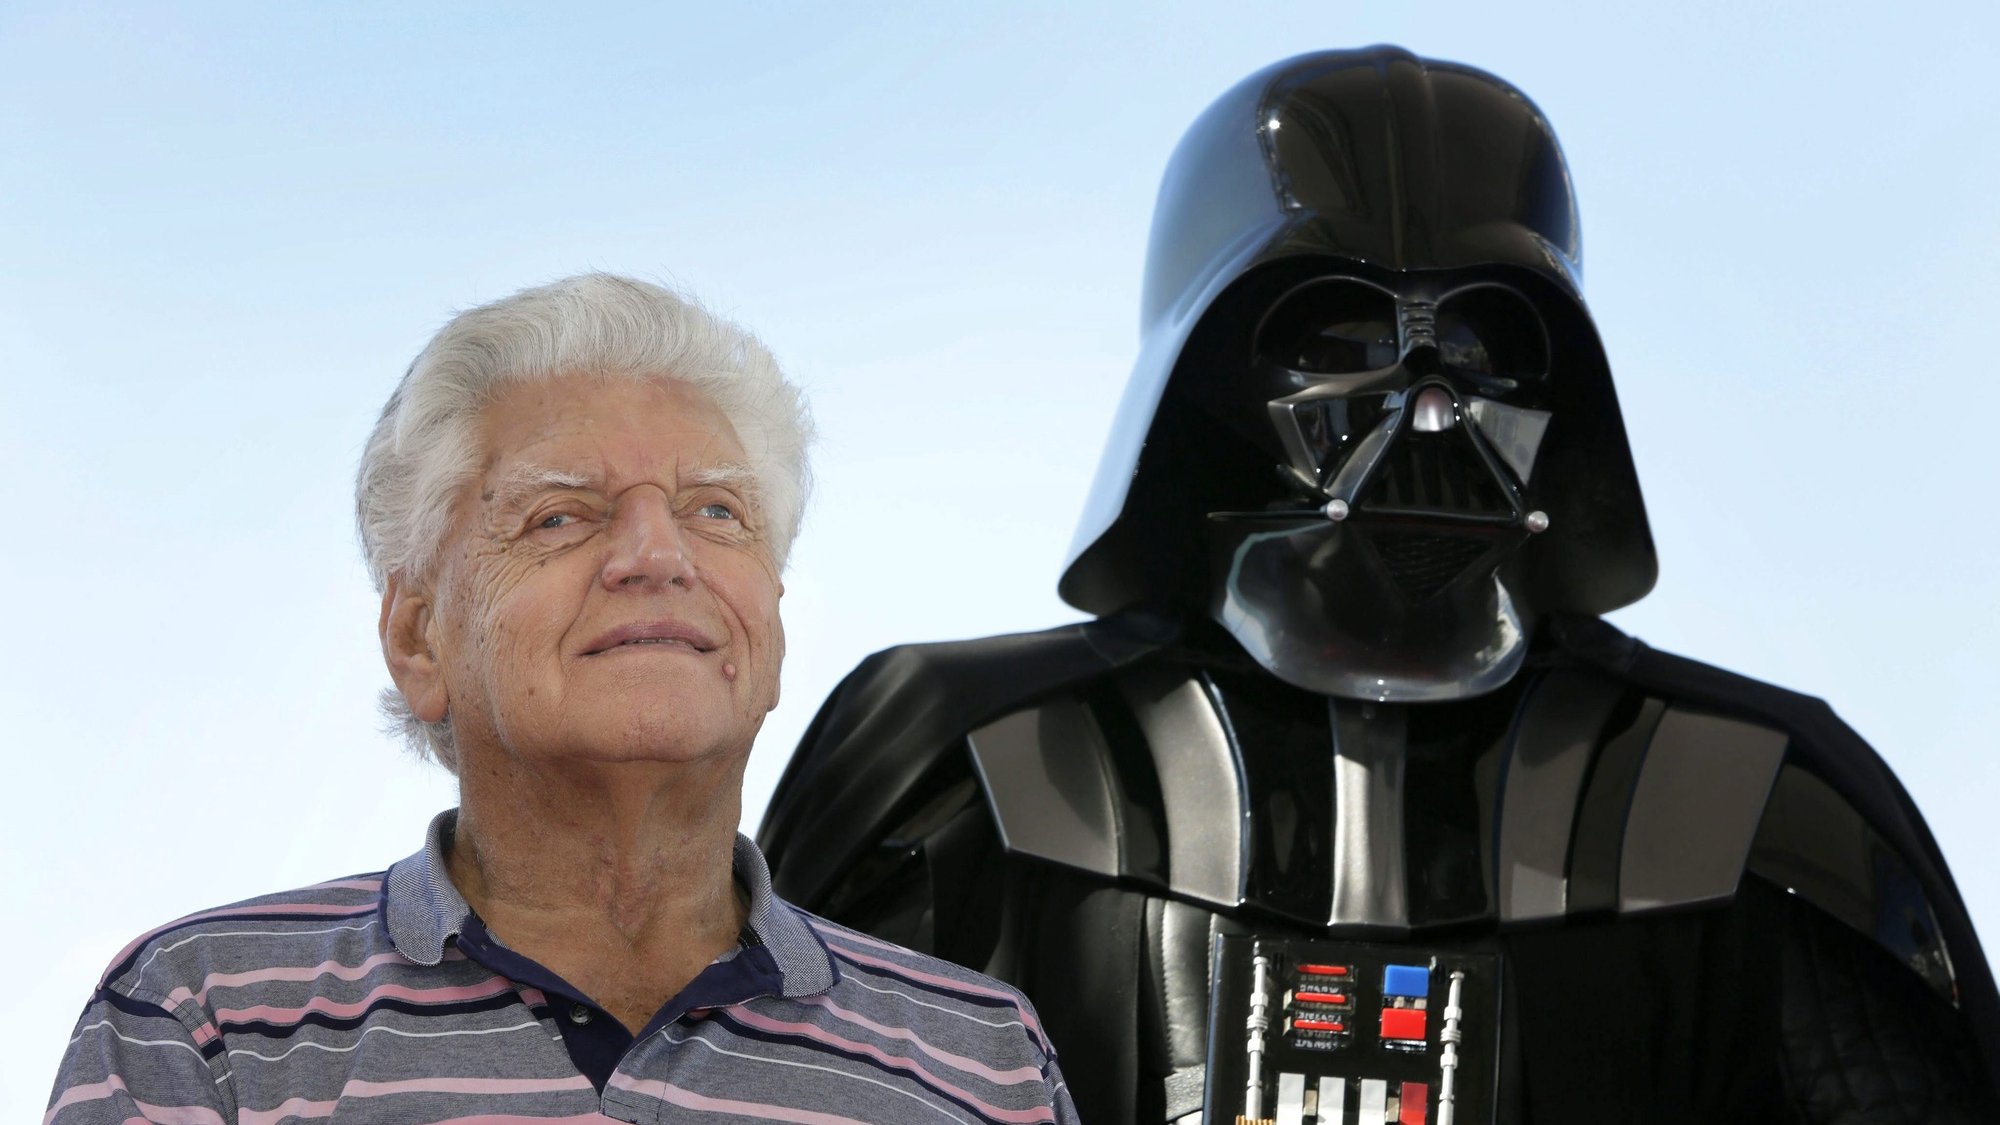 epa04975124 British actor David Prowse, who played Darth Vader in the original Star Wars movie trilogy, poses for photographers during the presentation of &#039;I Am Your Father&#039; at the 48th Sitges International Fantastic Film Festival, in Sitges, near Barcelona, Spain, 12 October 2015. The festival runs from 09 to 18 October.  EPA/SUSANNA SAEZ